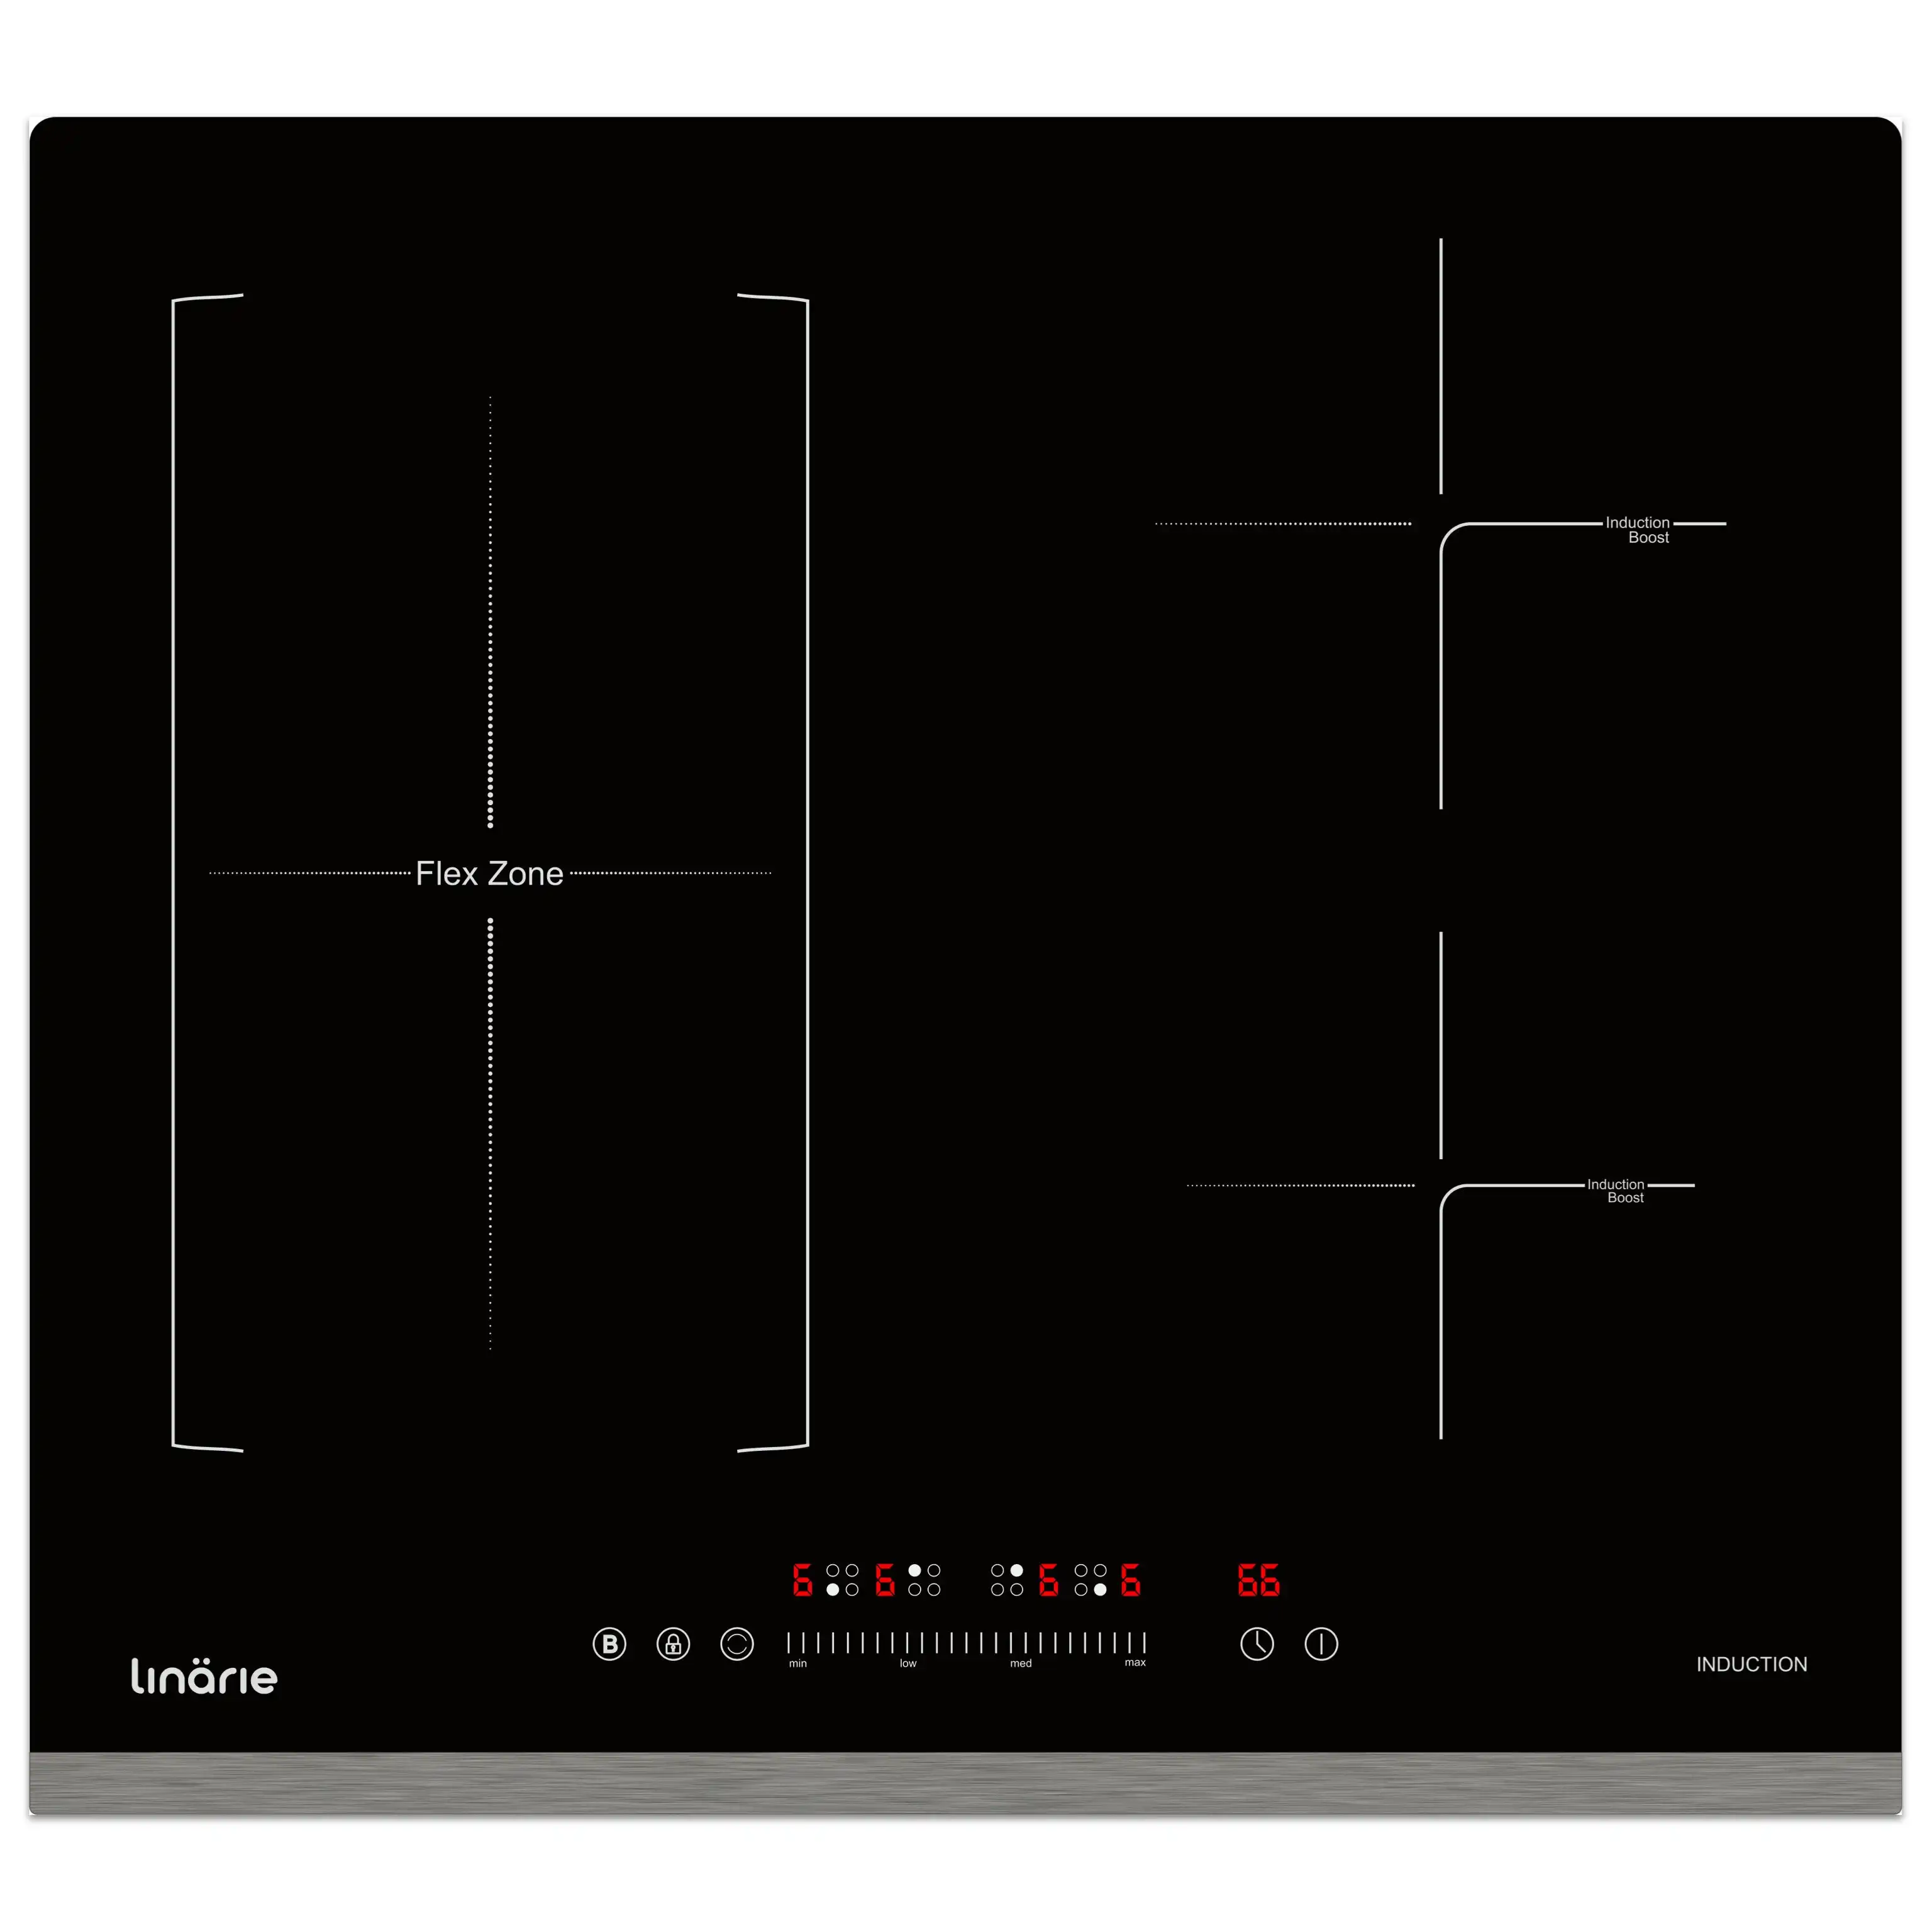 Linarie 60cm 4 Zone Induction Cooktop with Flex Zone